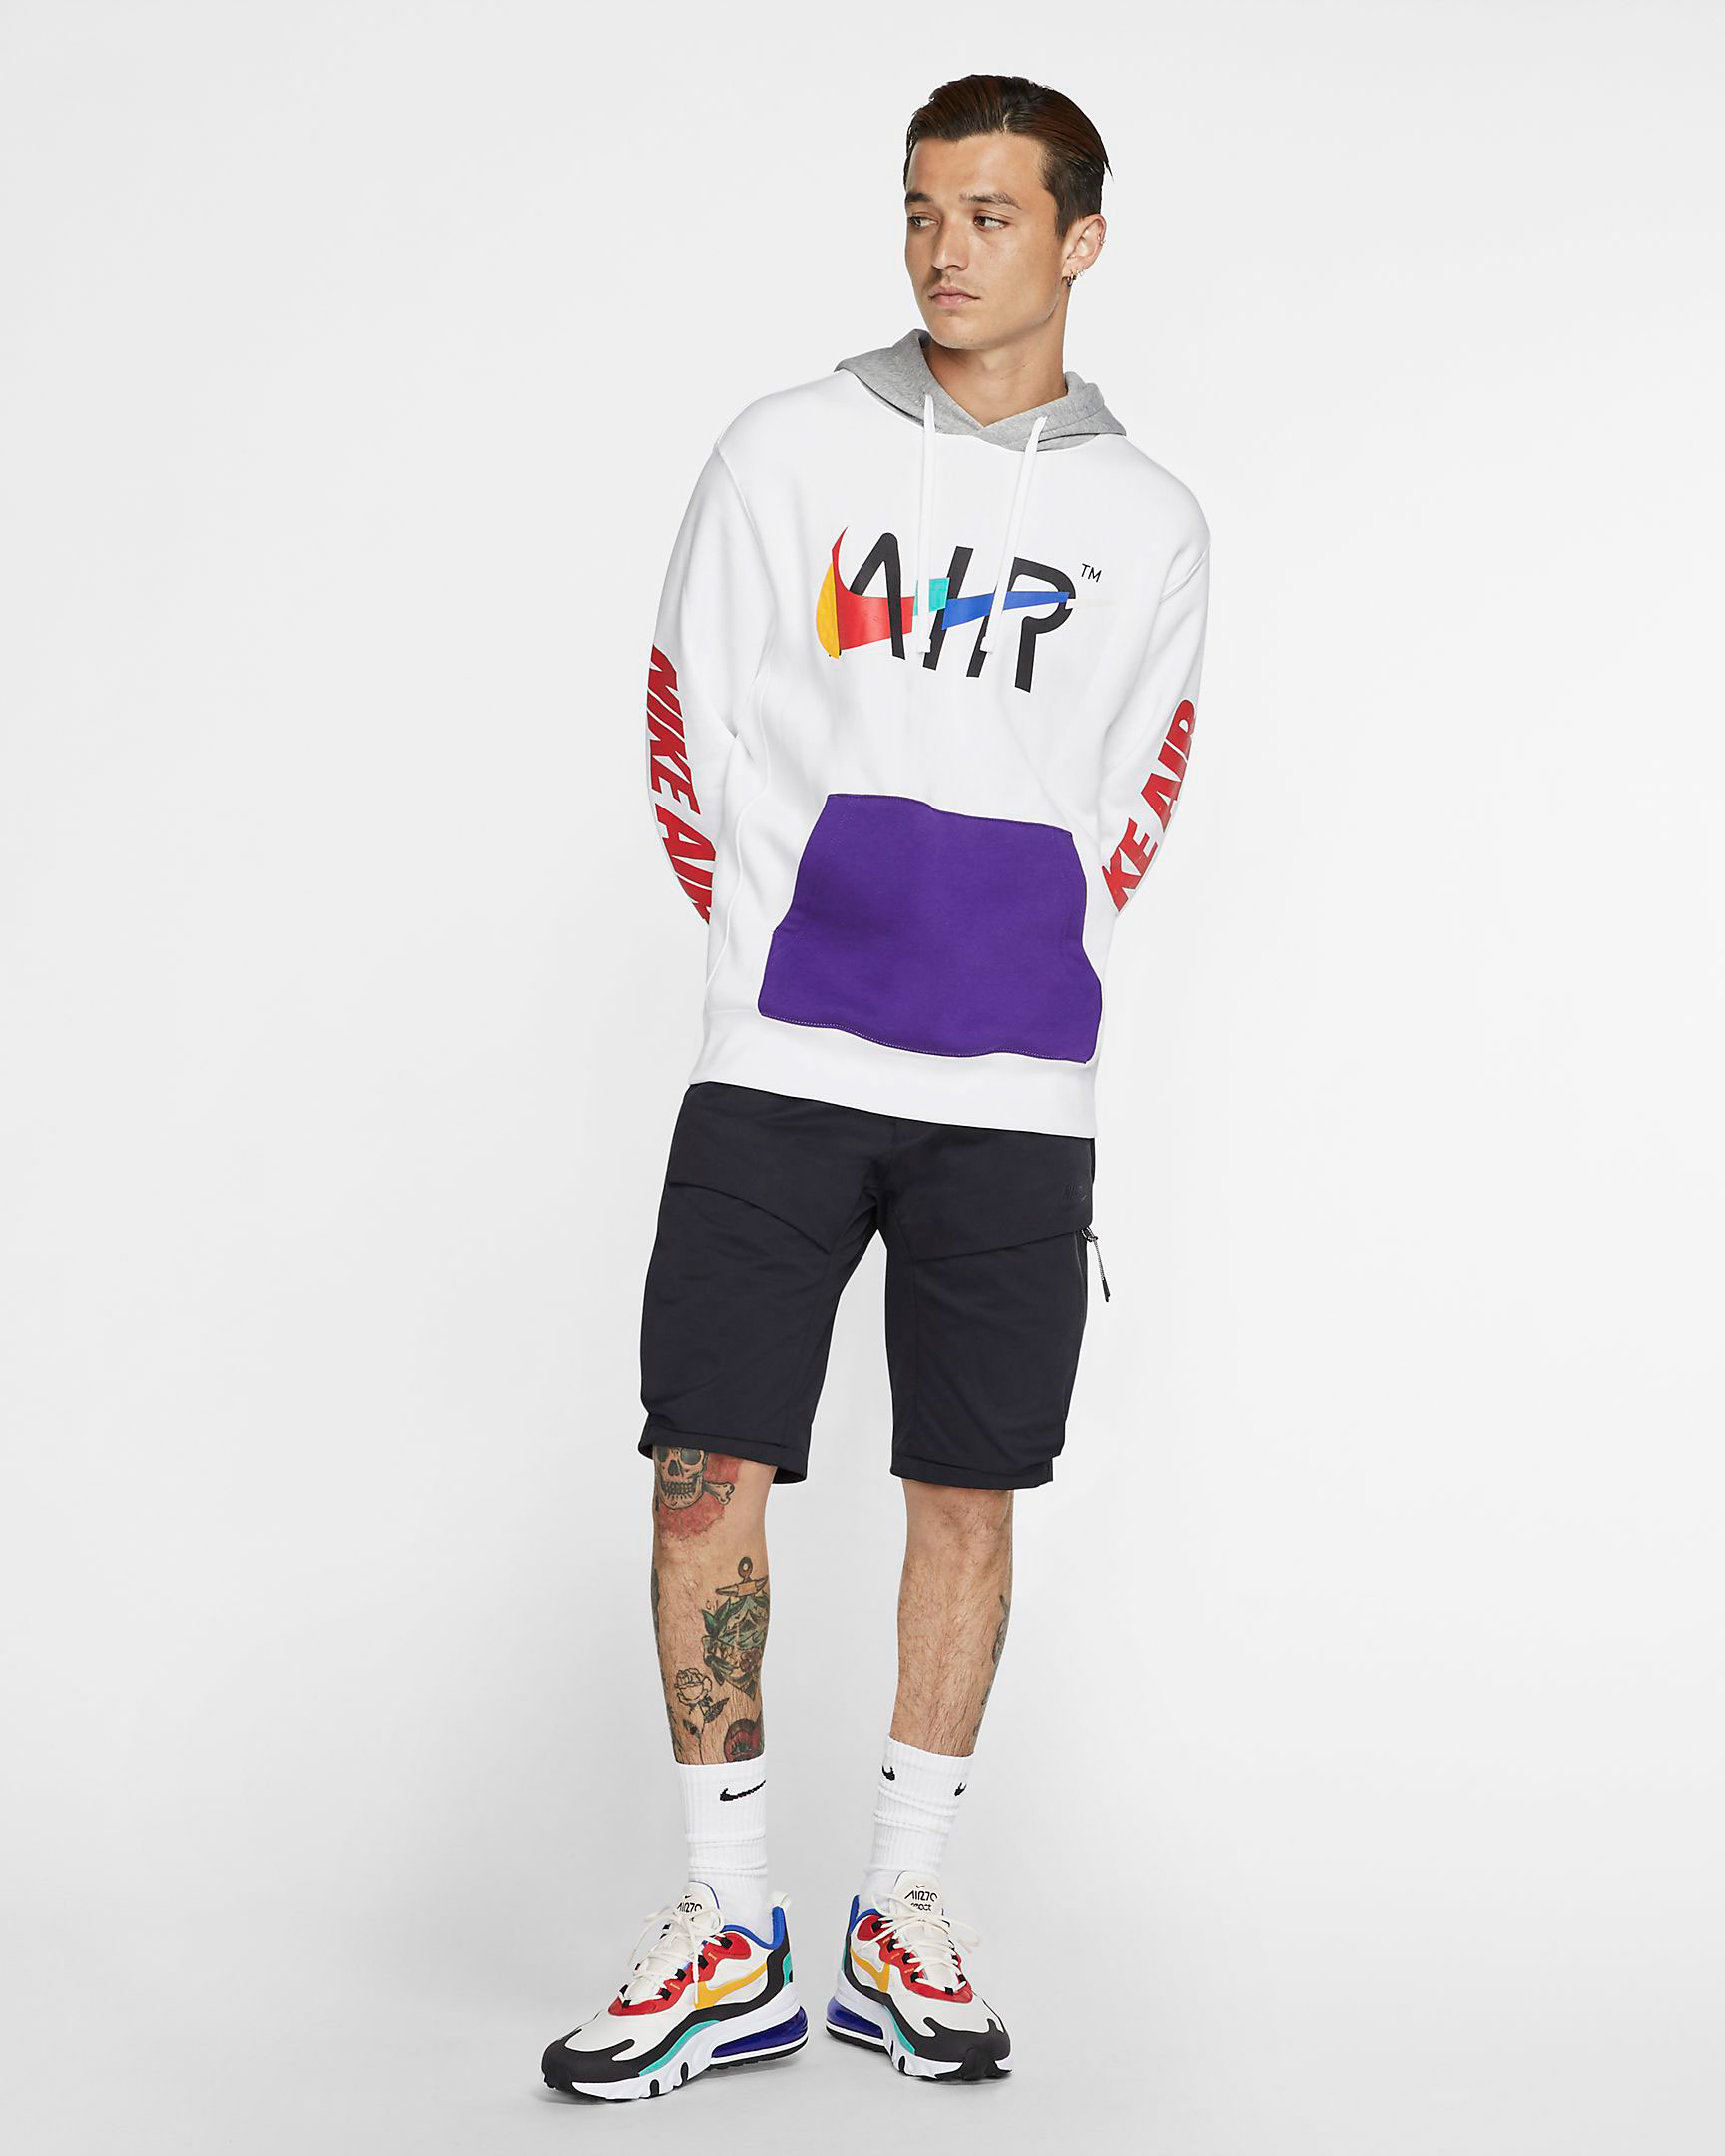 Nike Sportswear Game Changer Clothing and Shoes | SneakerFits.com